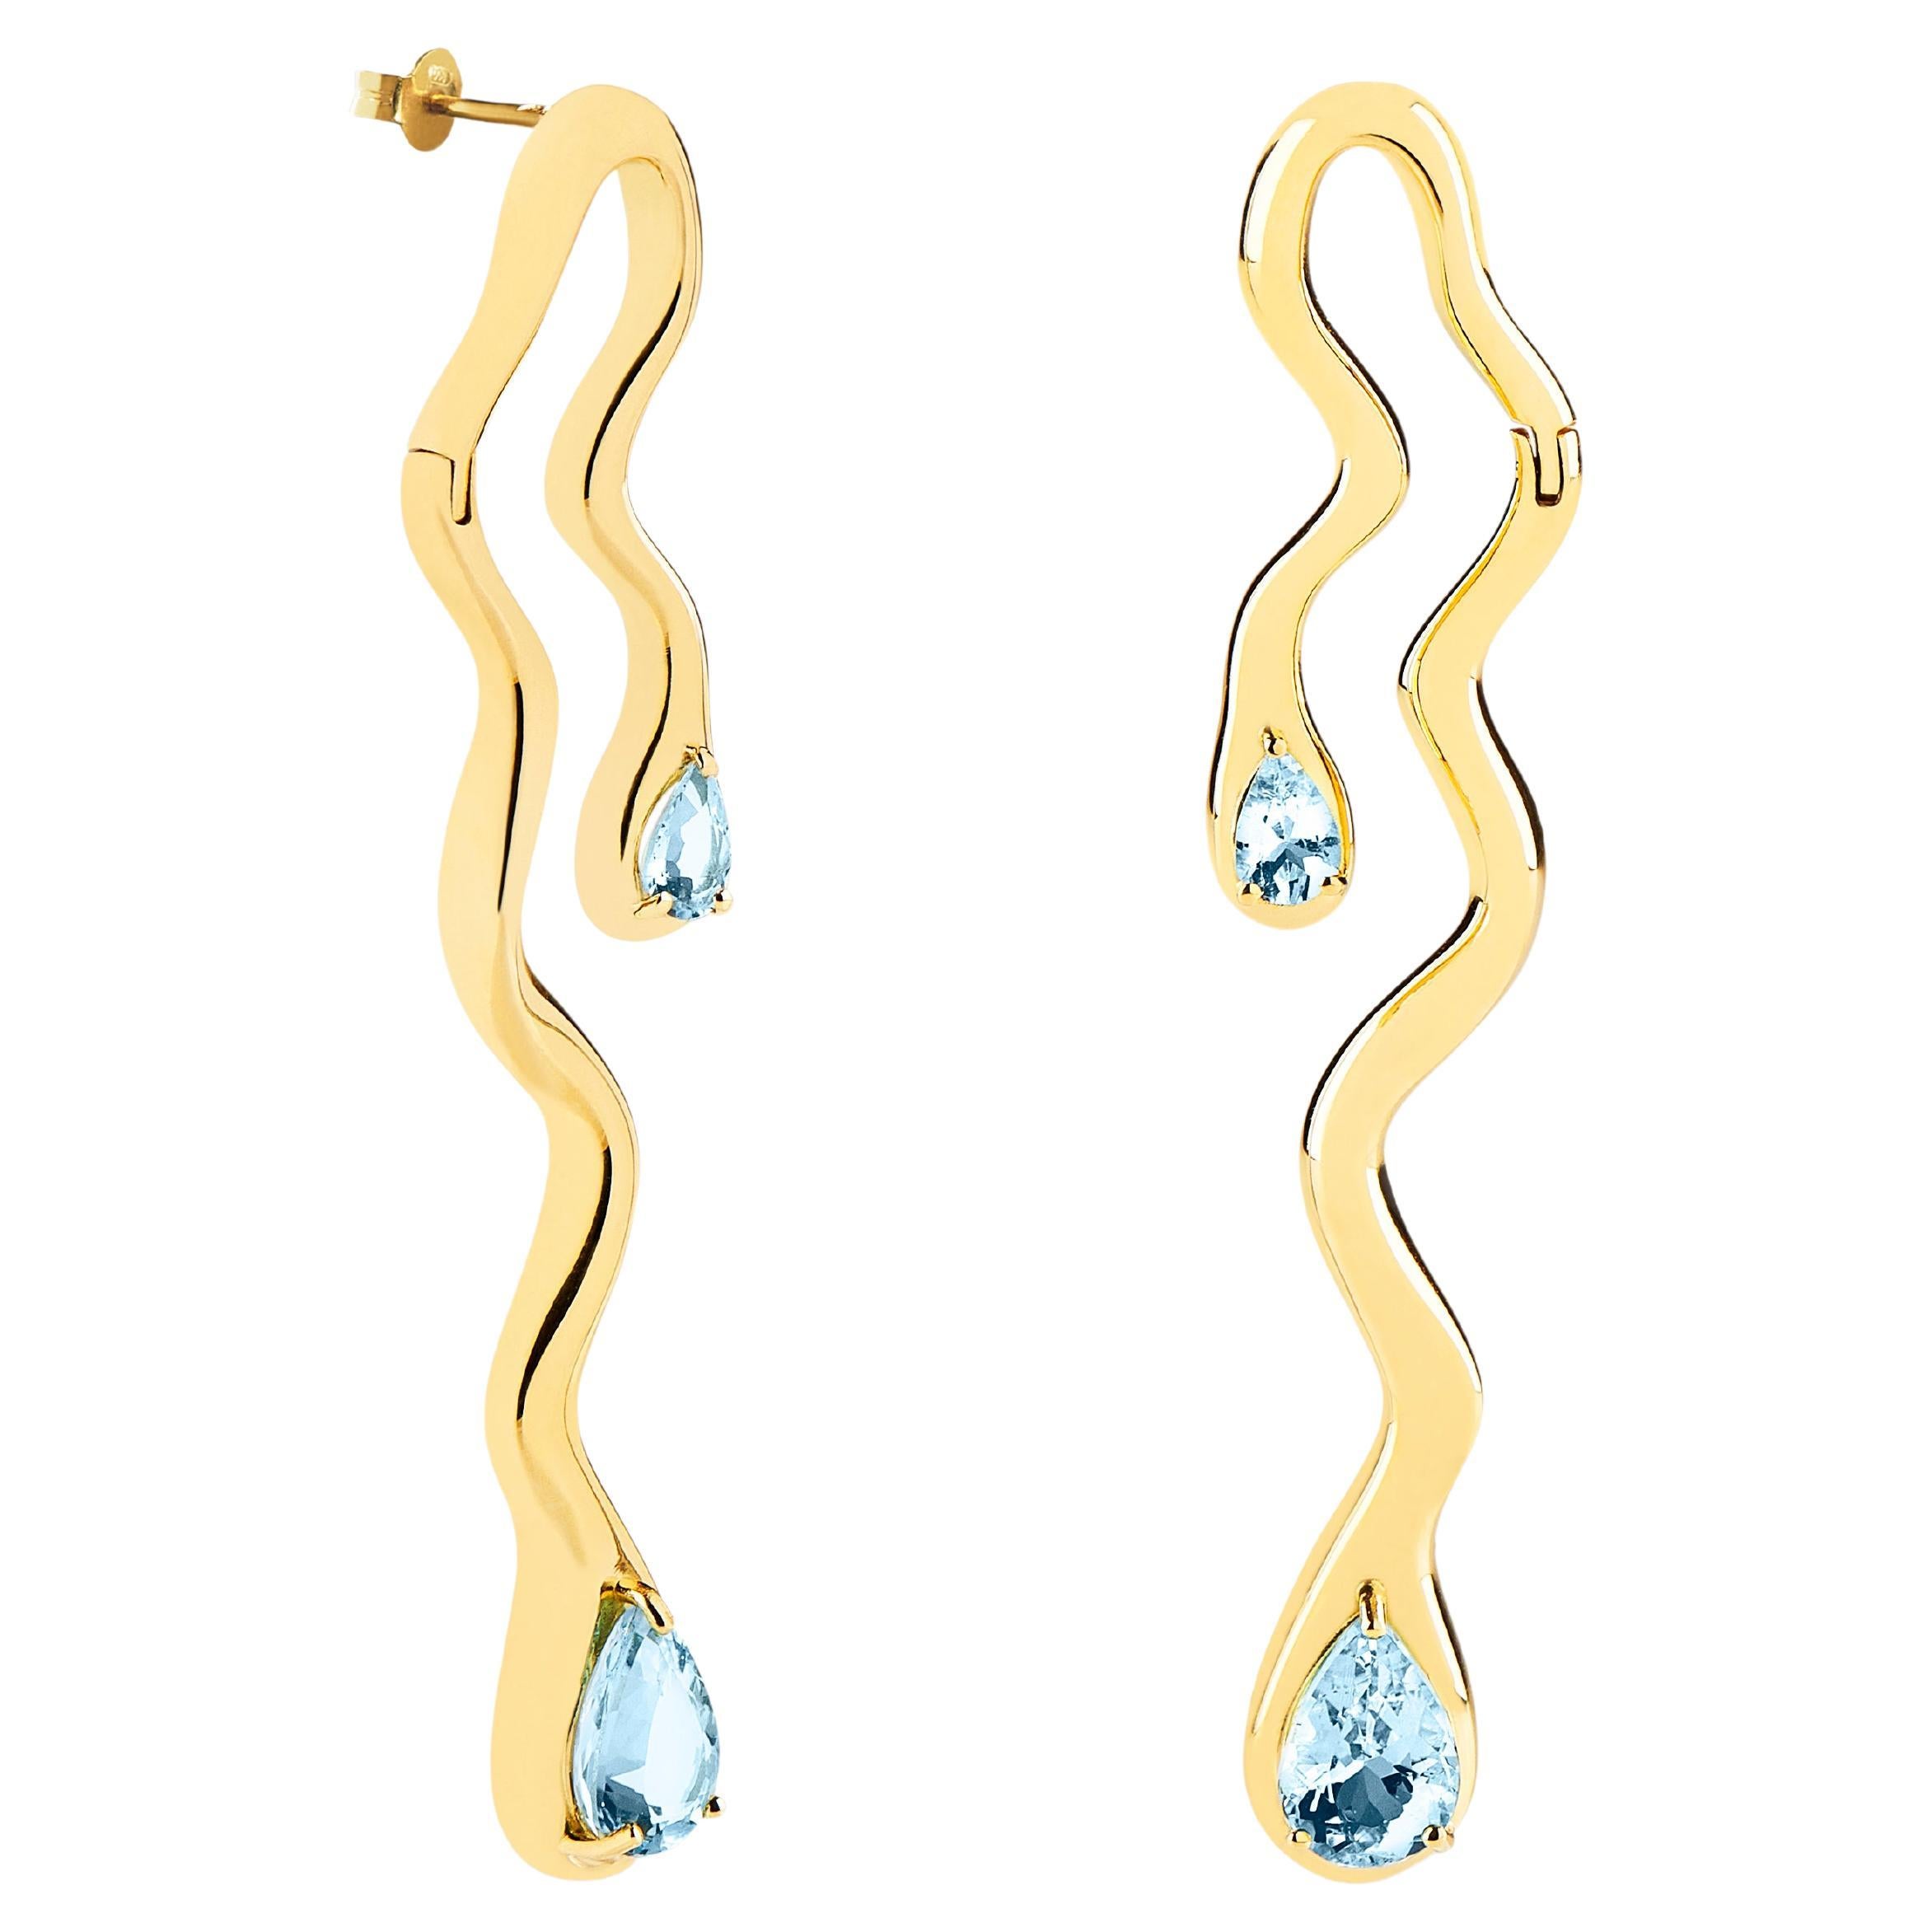 Long, articulated earrings in 18kt gold and 3.76 carat Aquamarine